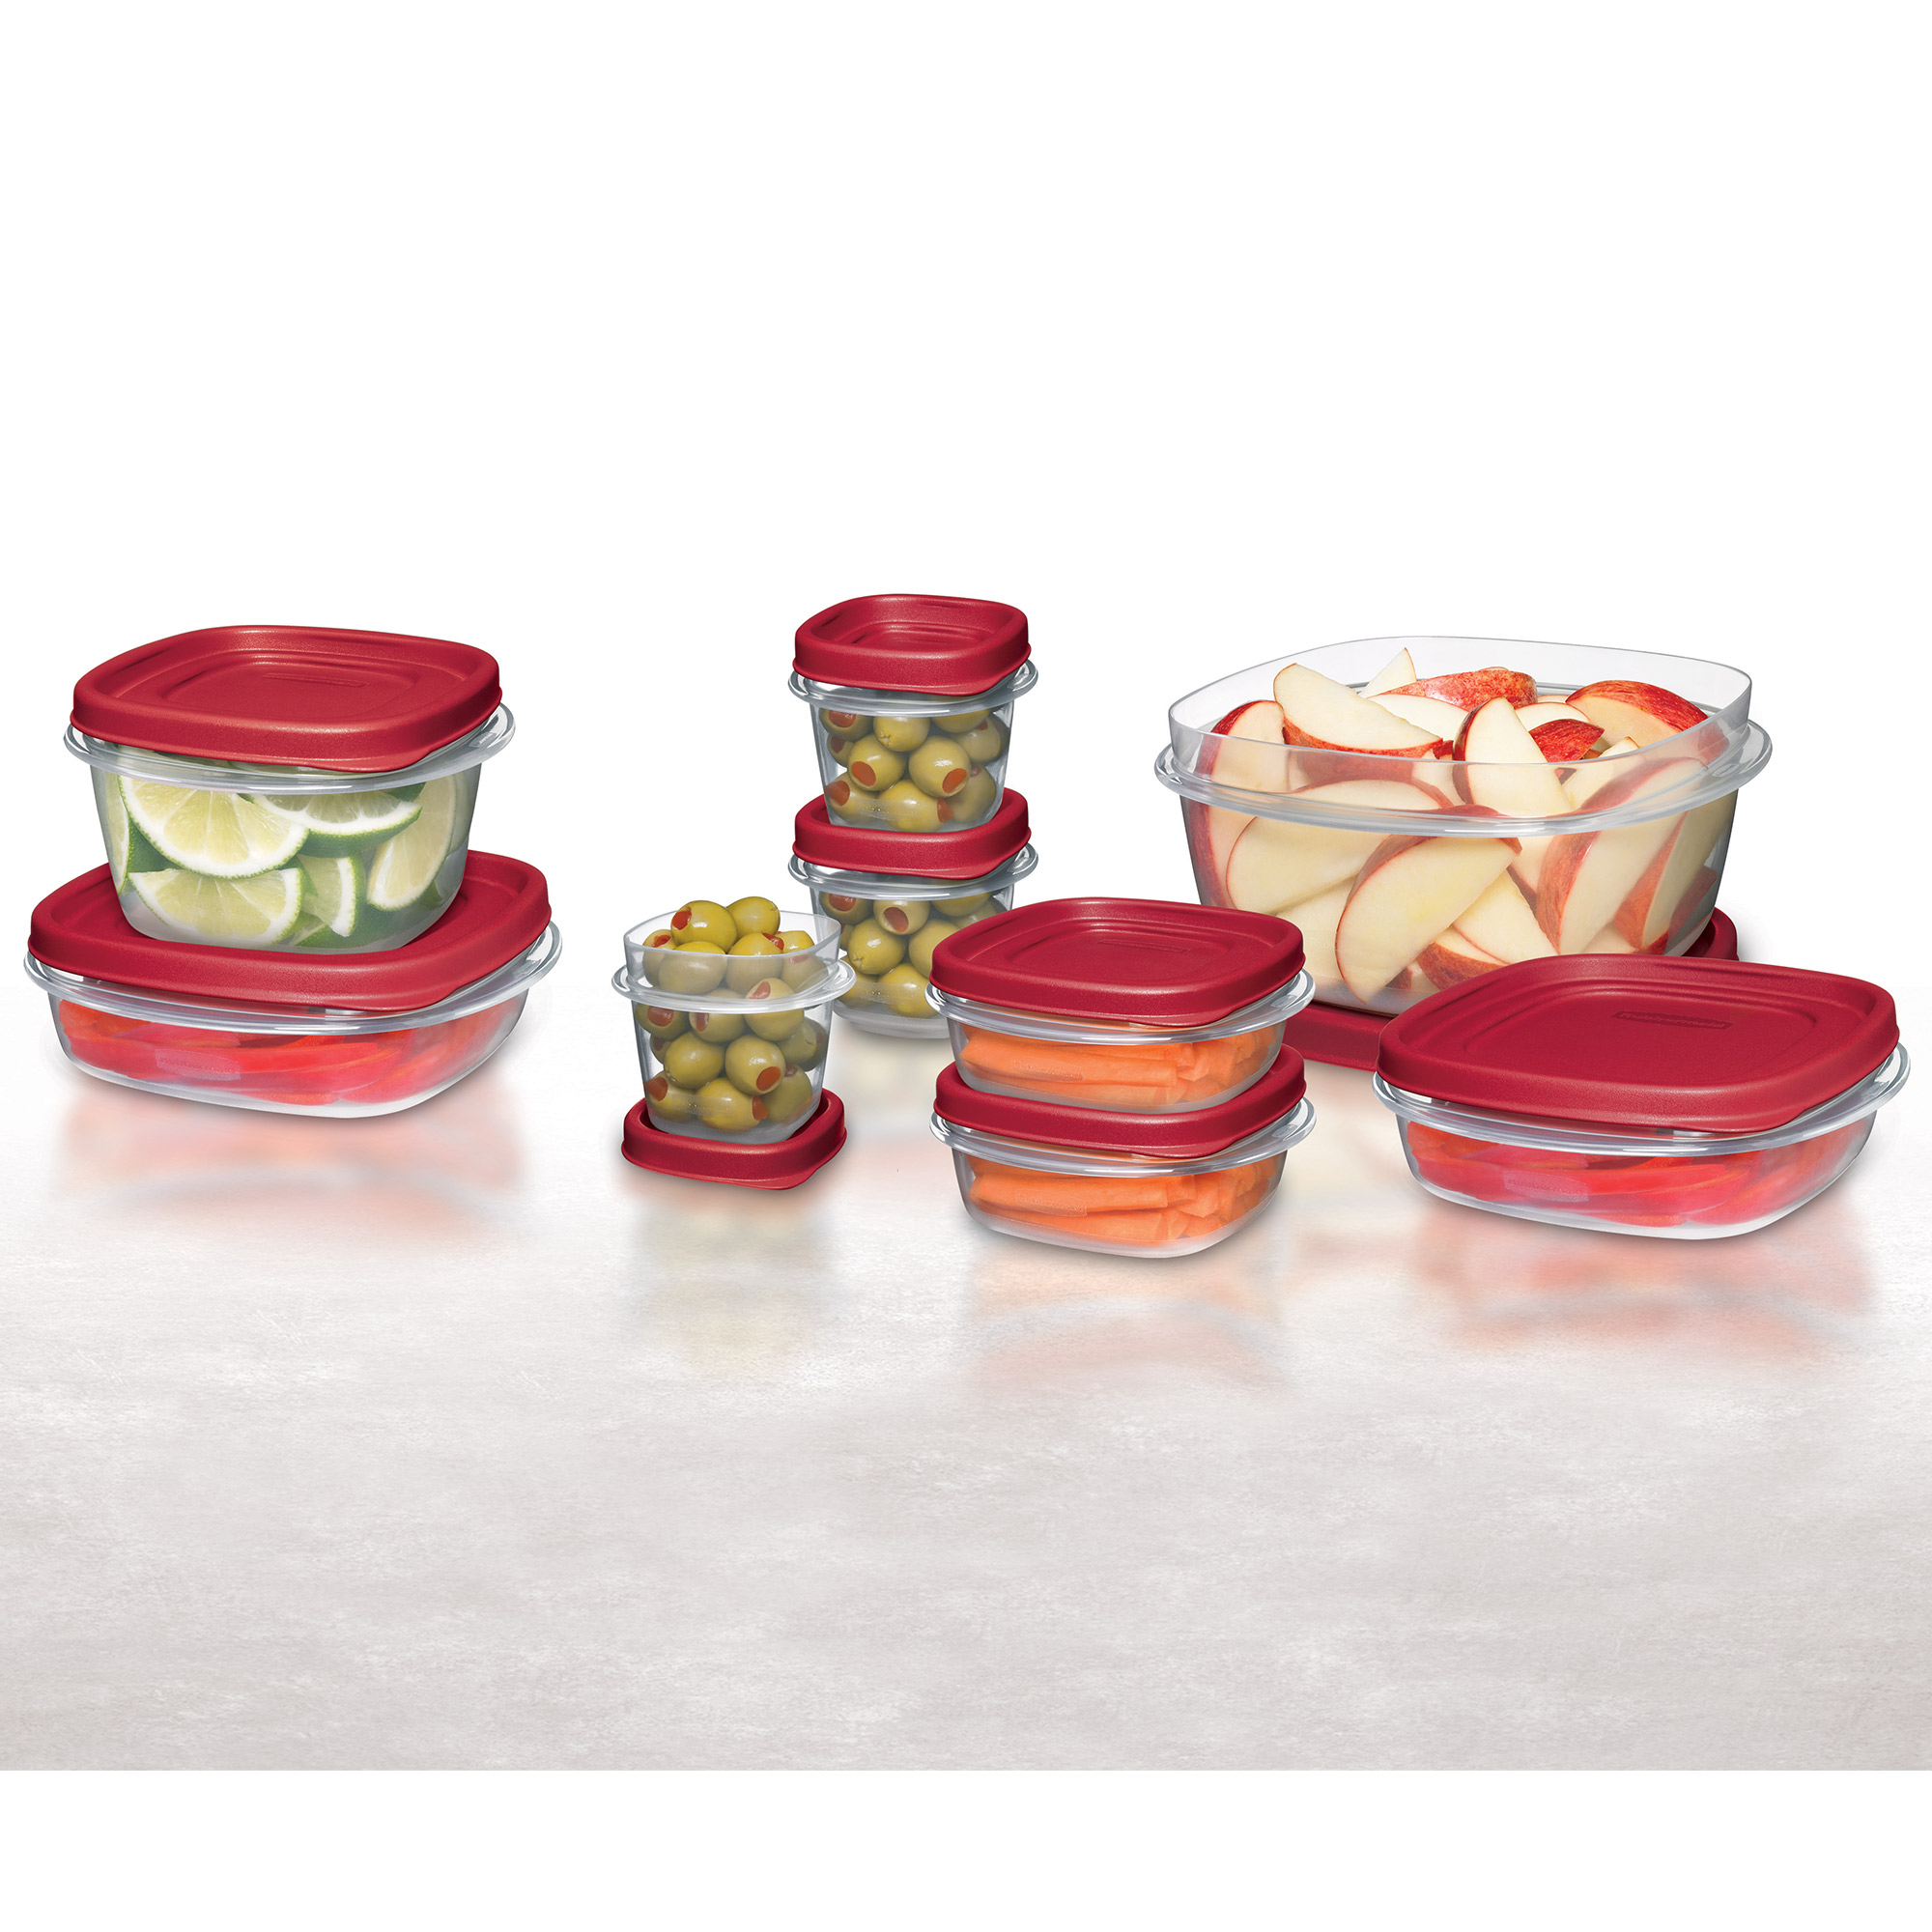 Rubbermaid Food Storage Containers with Easy Find Lids 24-Piece Set - image 3 of 6